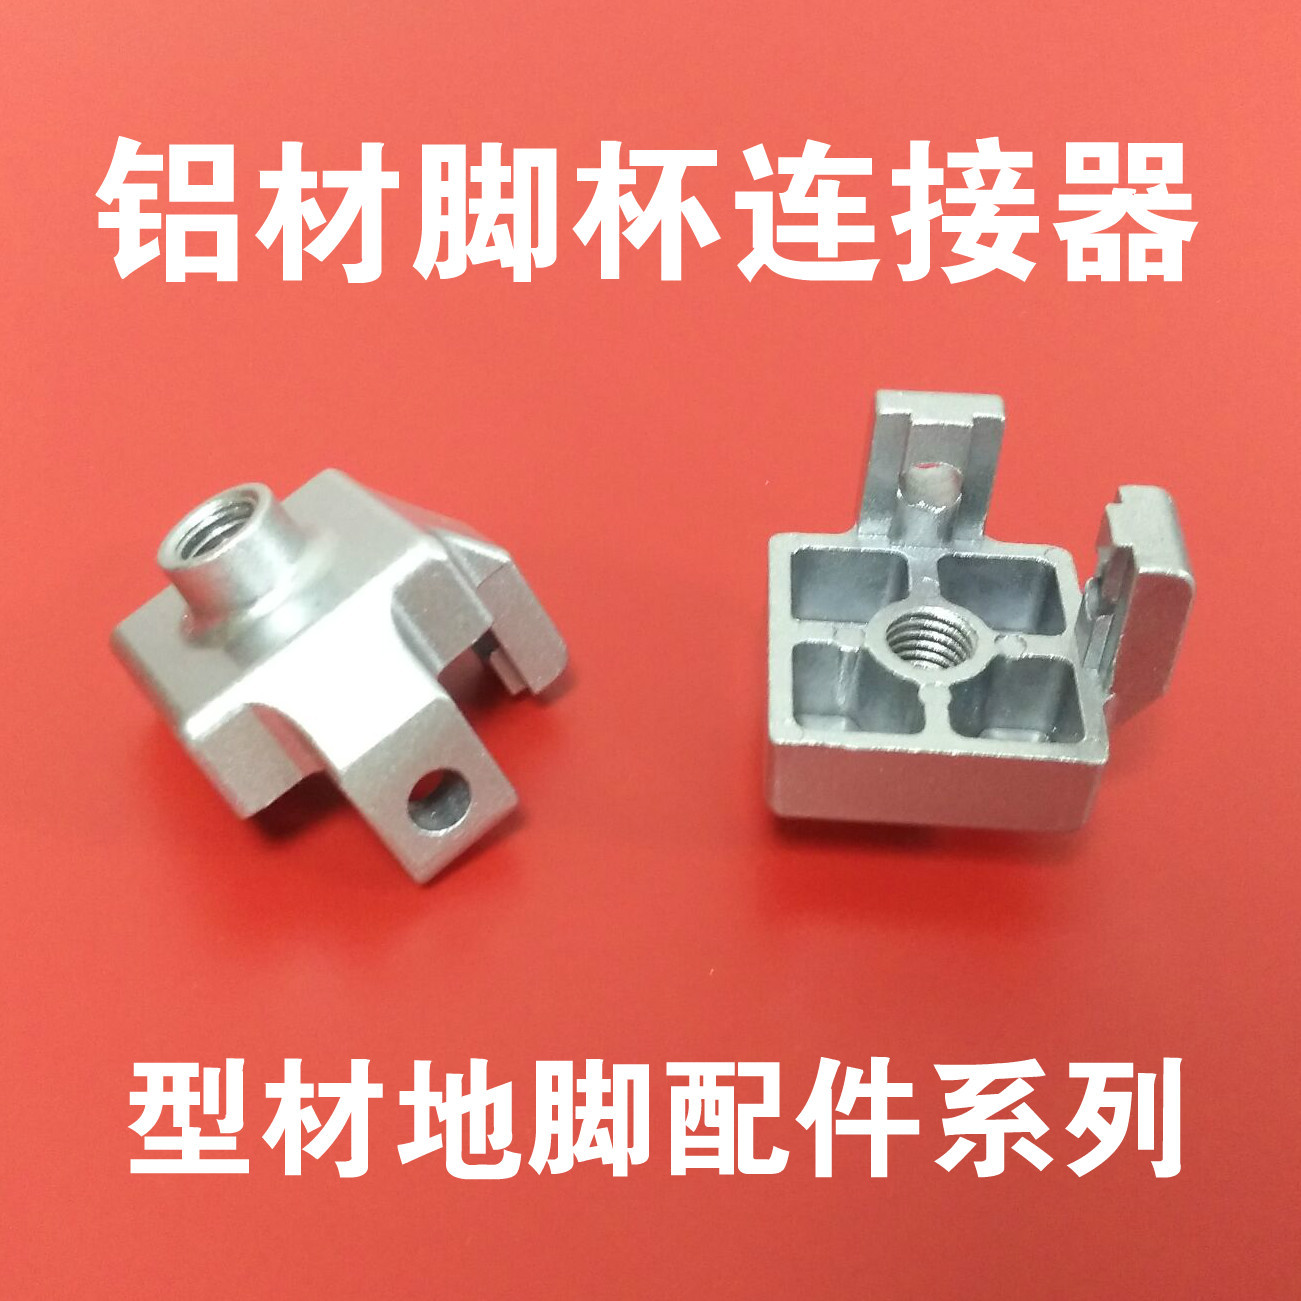 Profiles Accessories 3030/4040 Profiles Machine feet Connector Foundation connector Foot cup fixing seat